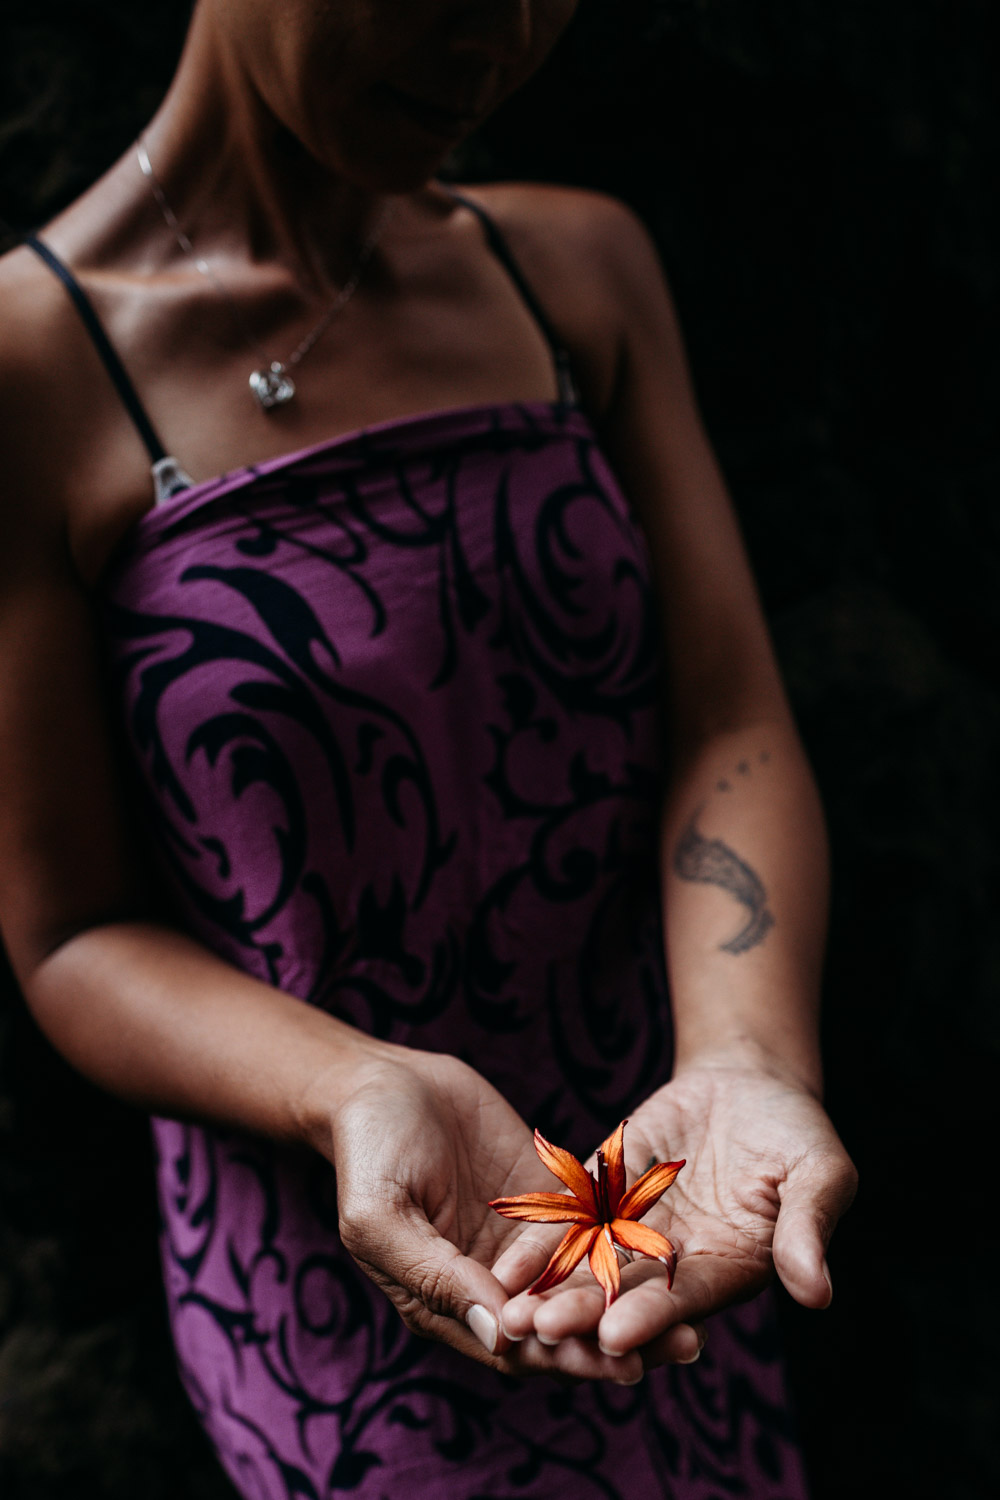 Woman holds bright orange flower in the palm of her hands during her Kauai photoshoot.